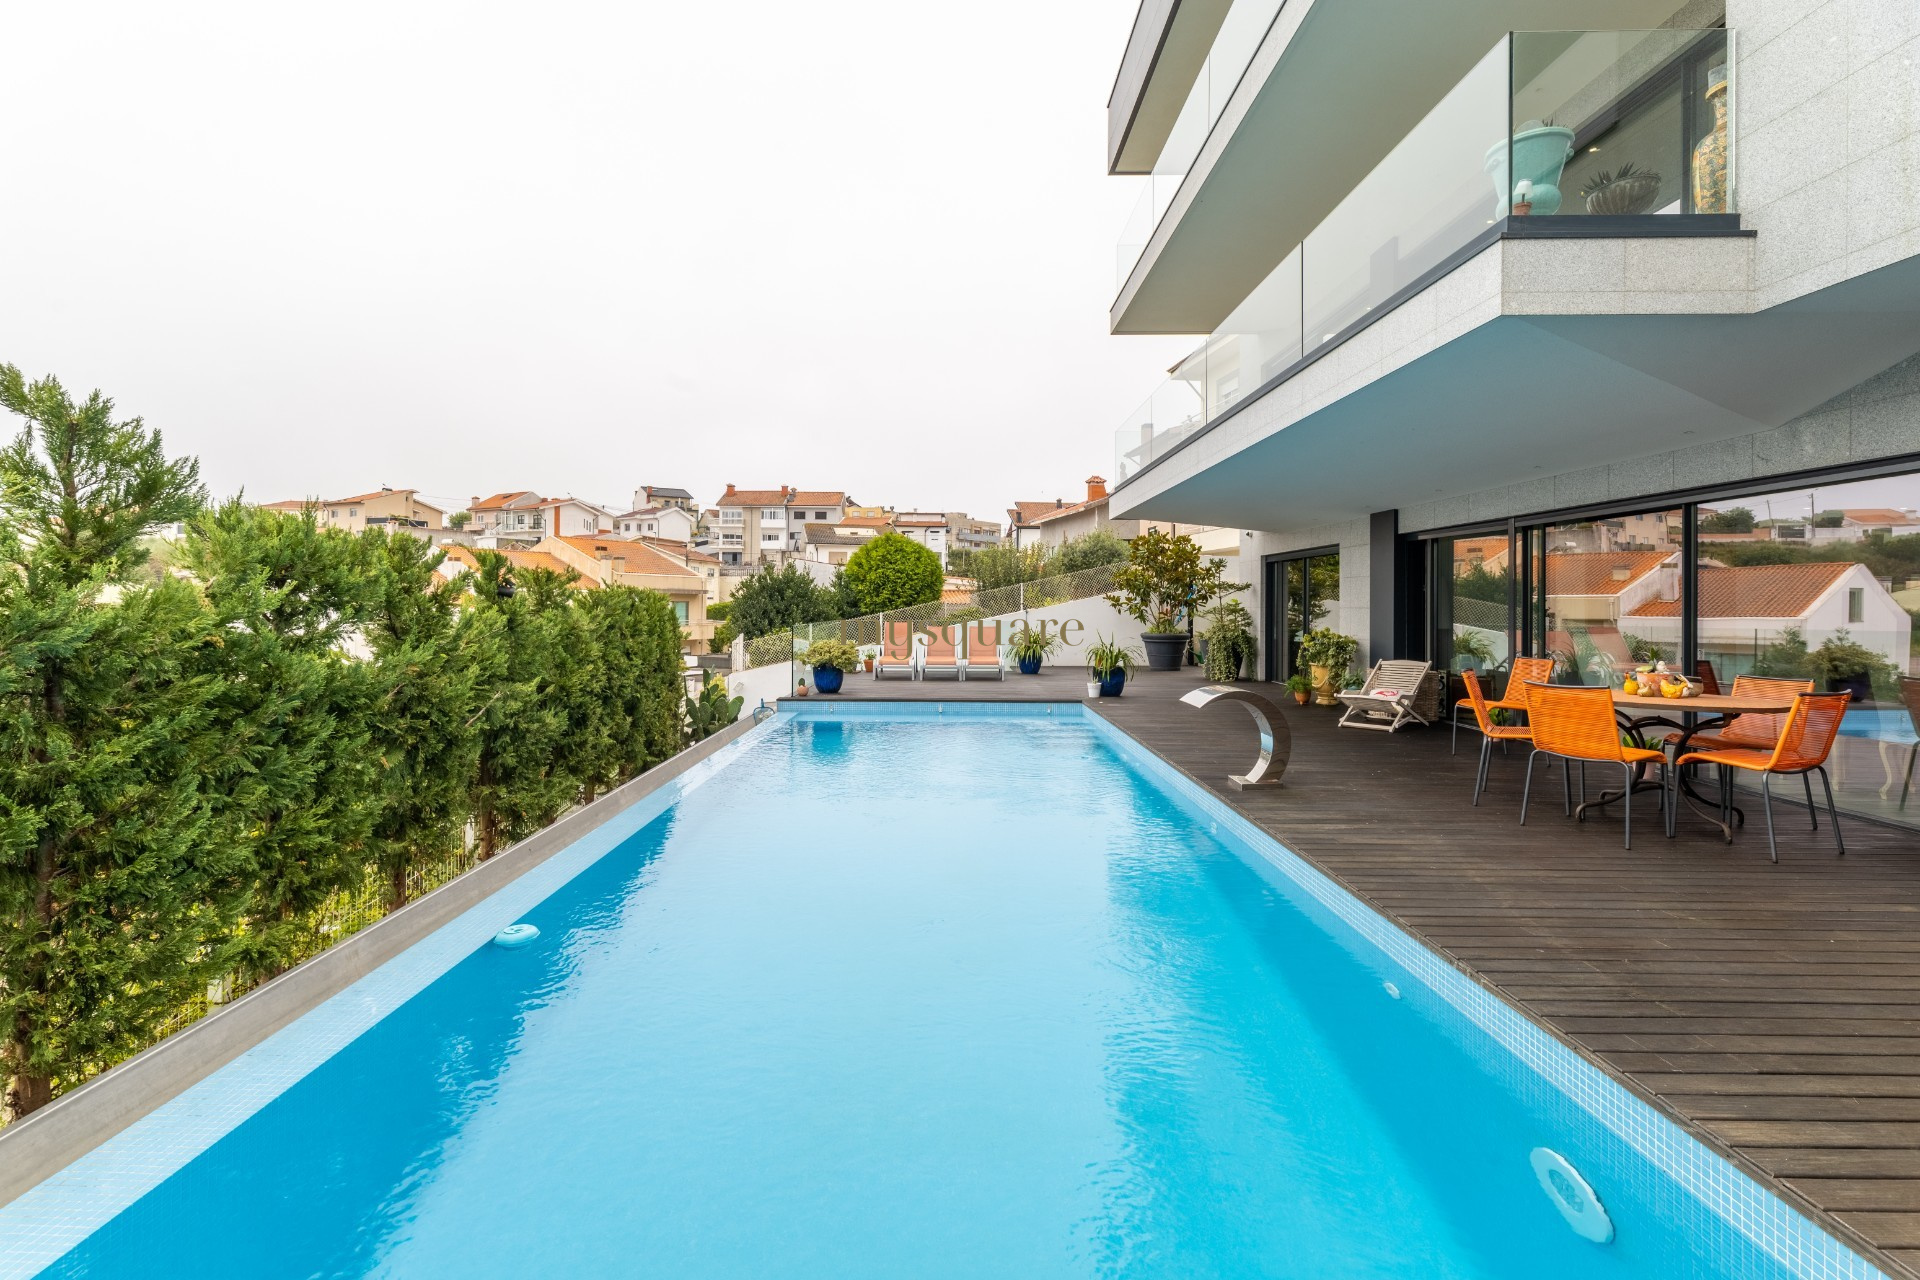 Independent villa with 5 suites, elevator and swimming pool overlooking the Douro River, Vila Nova d